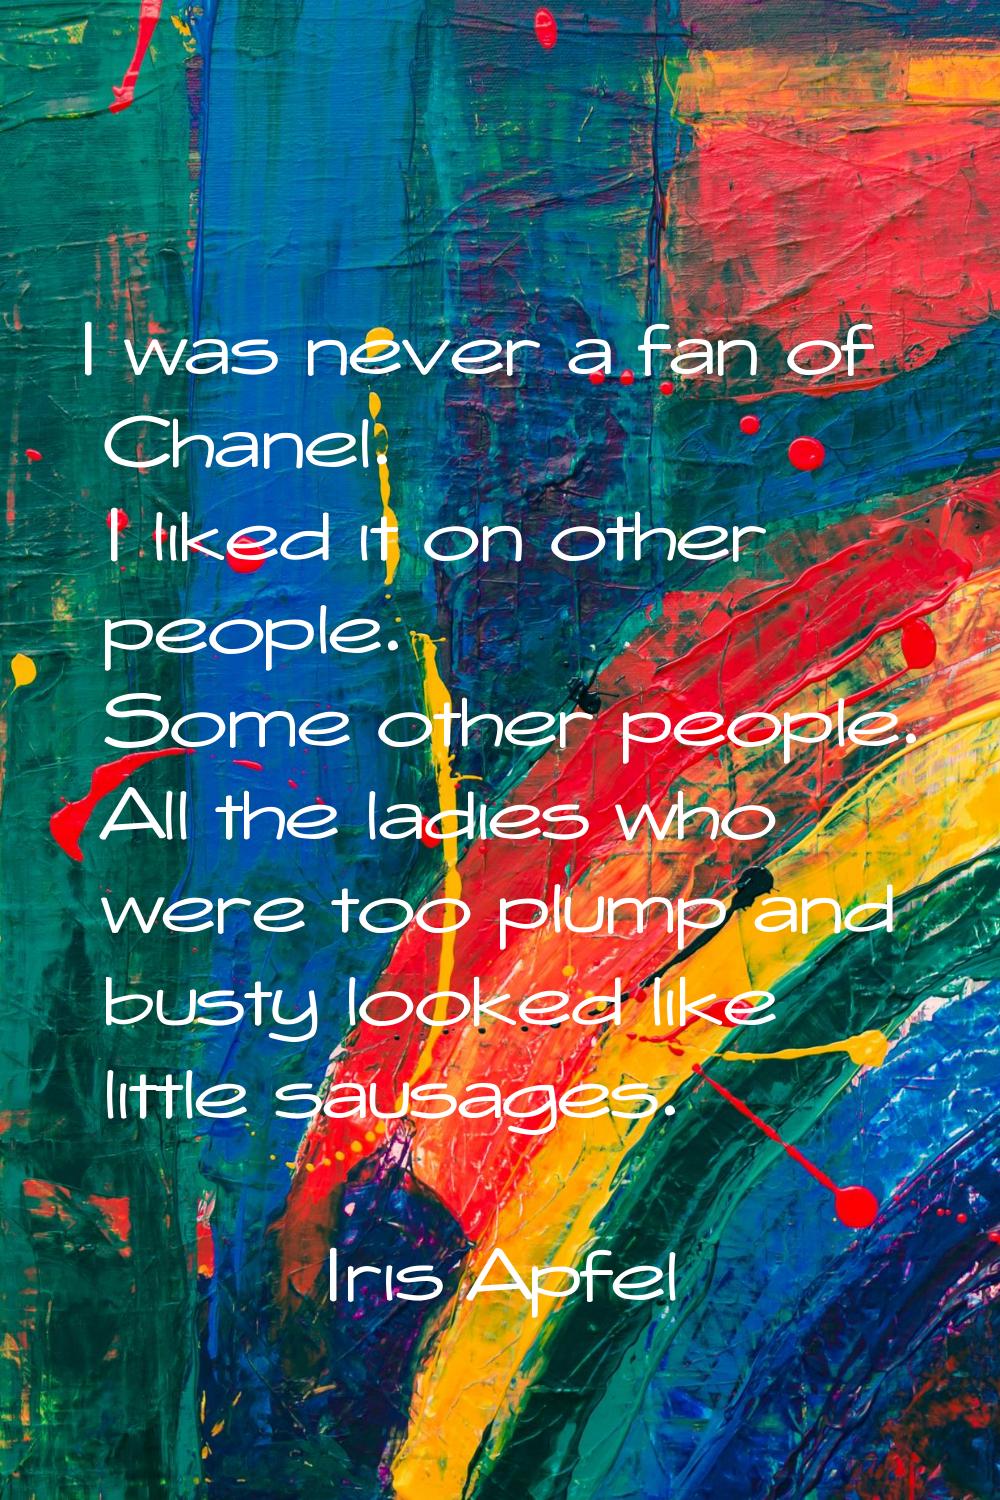 I was never a fan of Chanel. I liked it on other people. Some other people. All the ladies who were